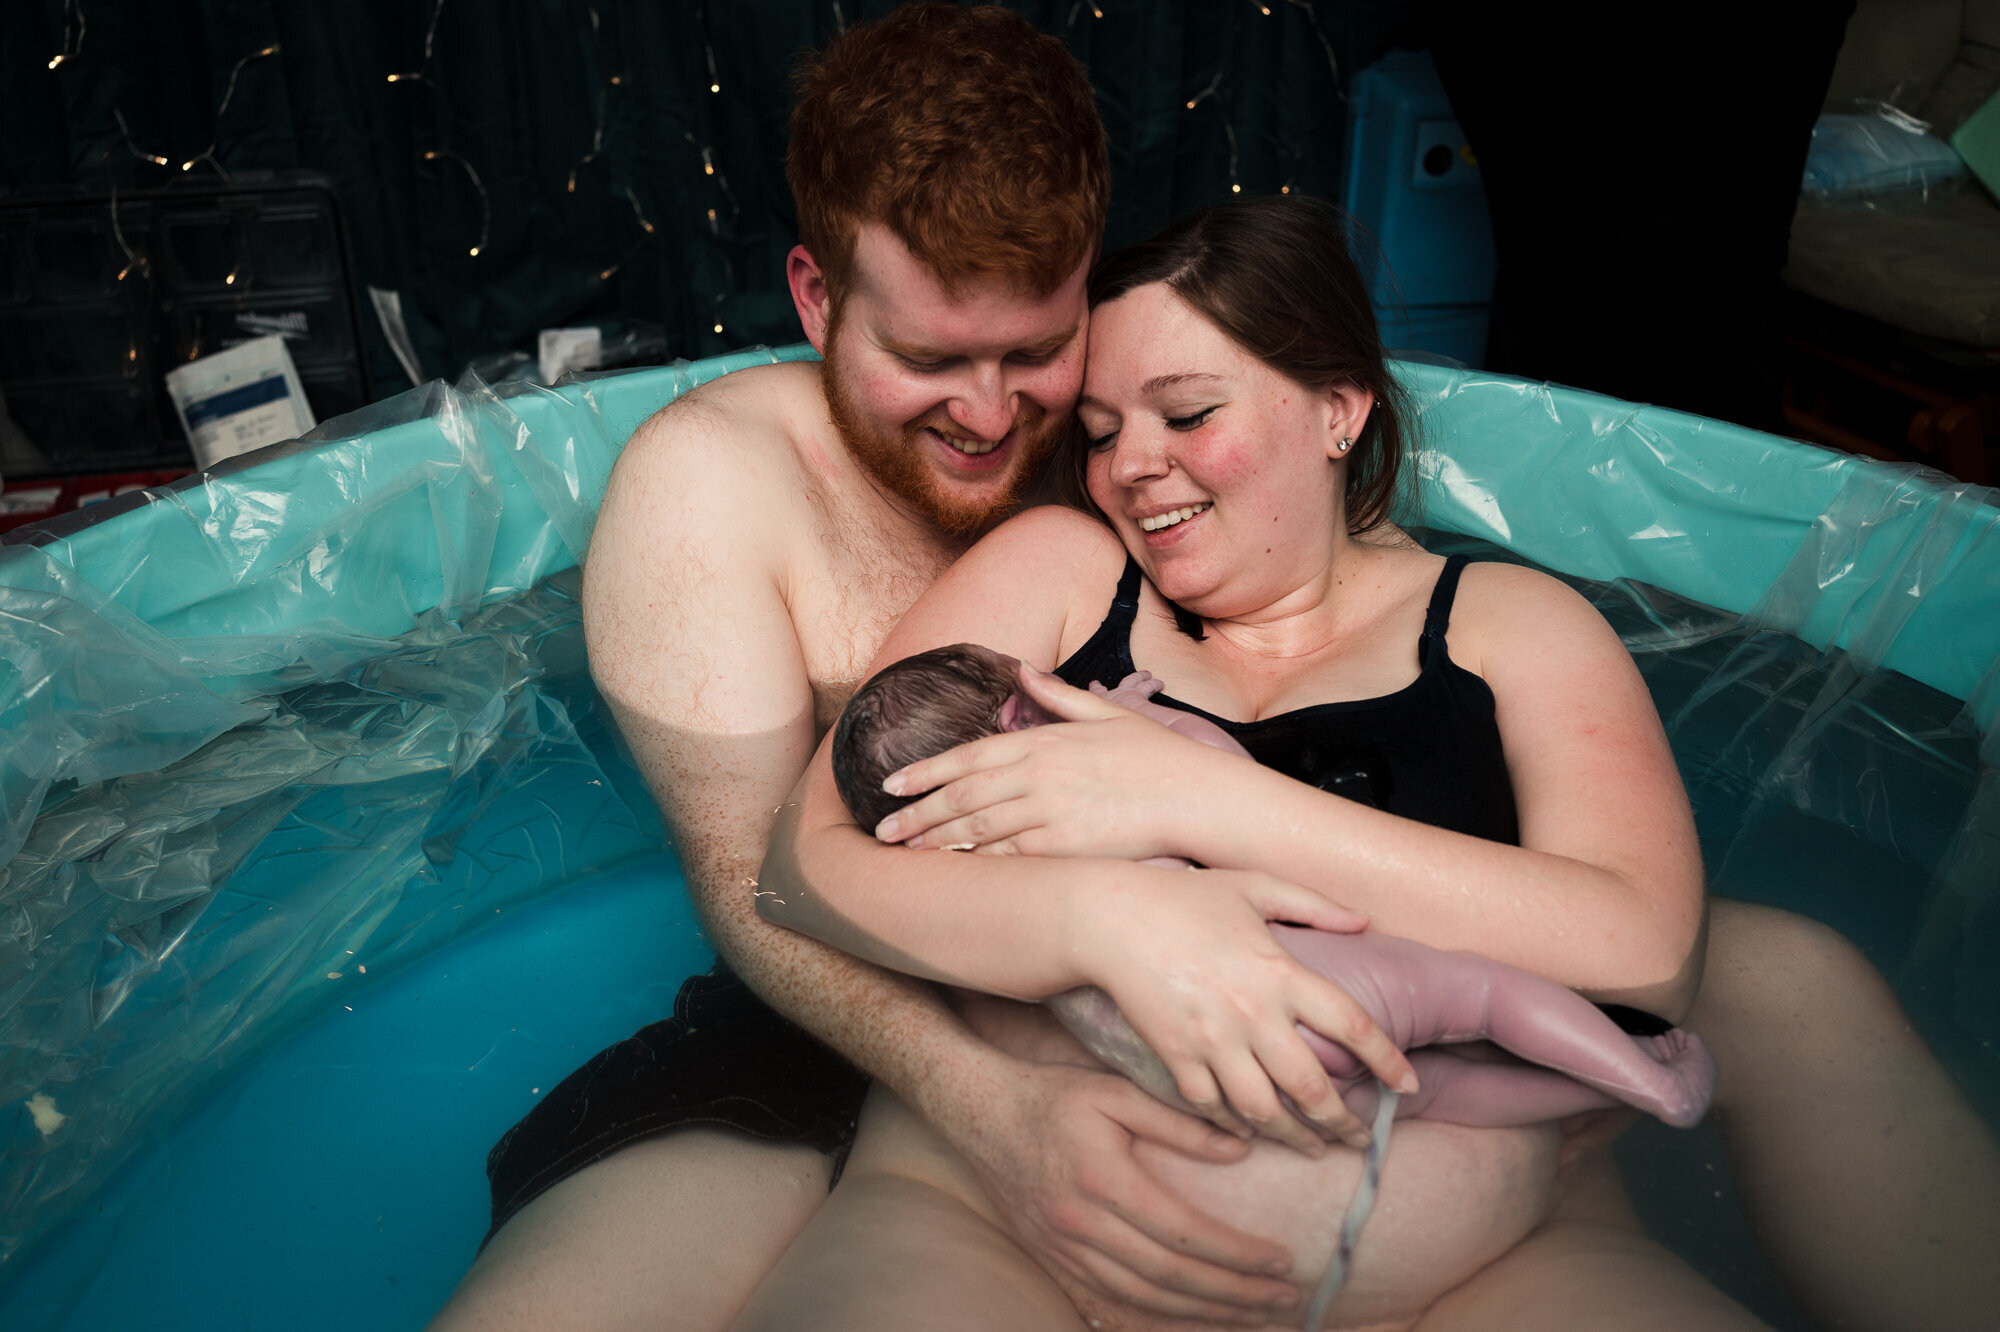 Gather+Birth+Cooperative-+Doula+Support+and+Birth+Photography+in+Minneapolis+-+April+04,+2021+-+180621.jpg